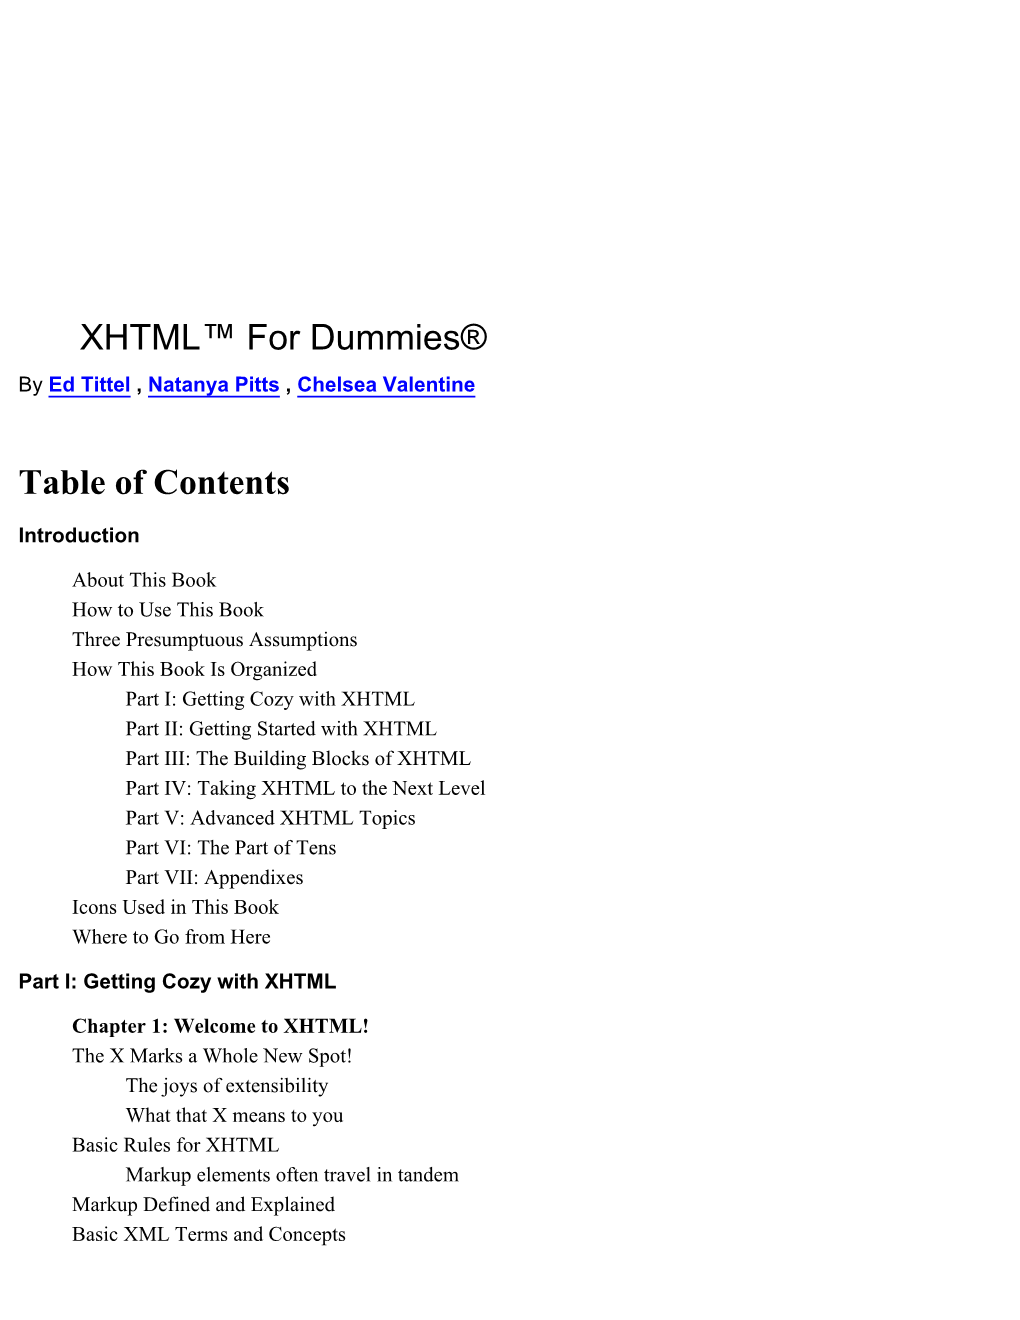 XHTML™ for Dummies® Table of Contents